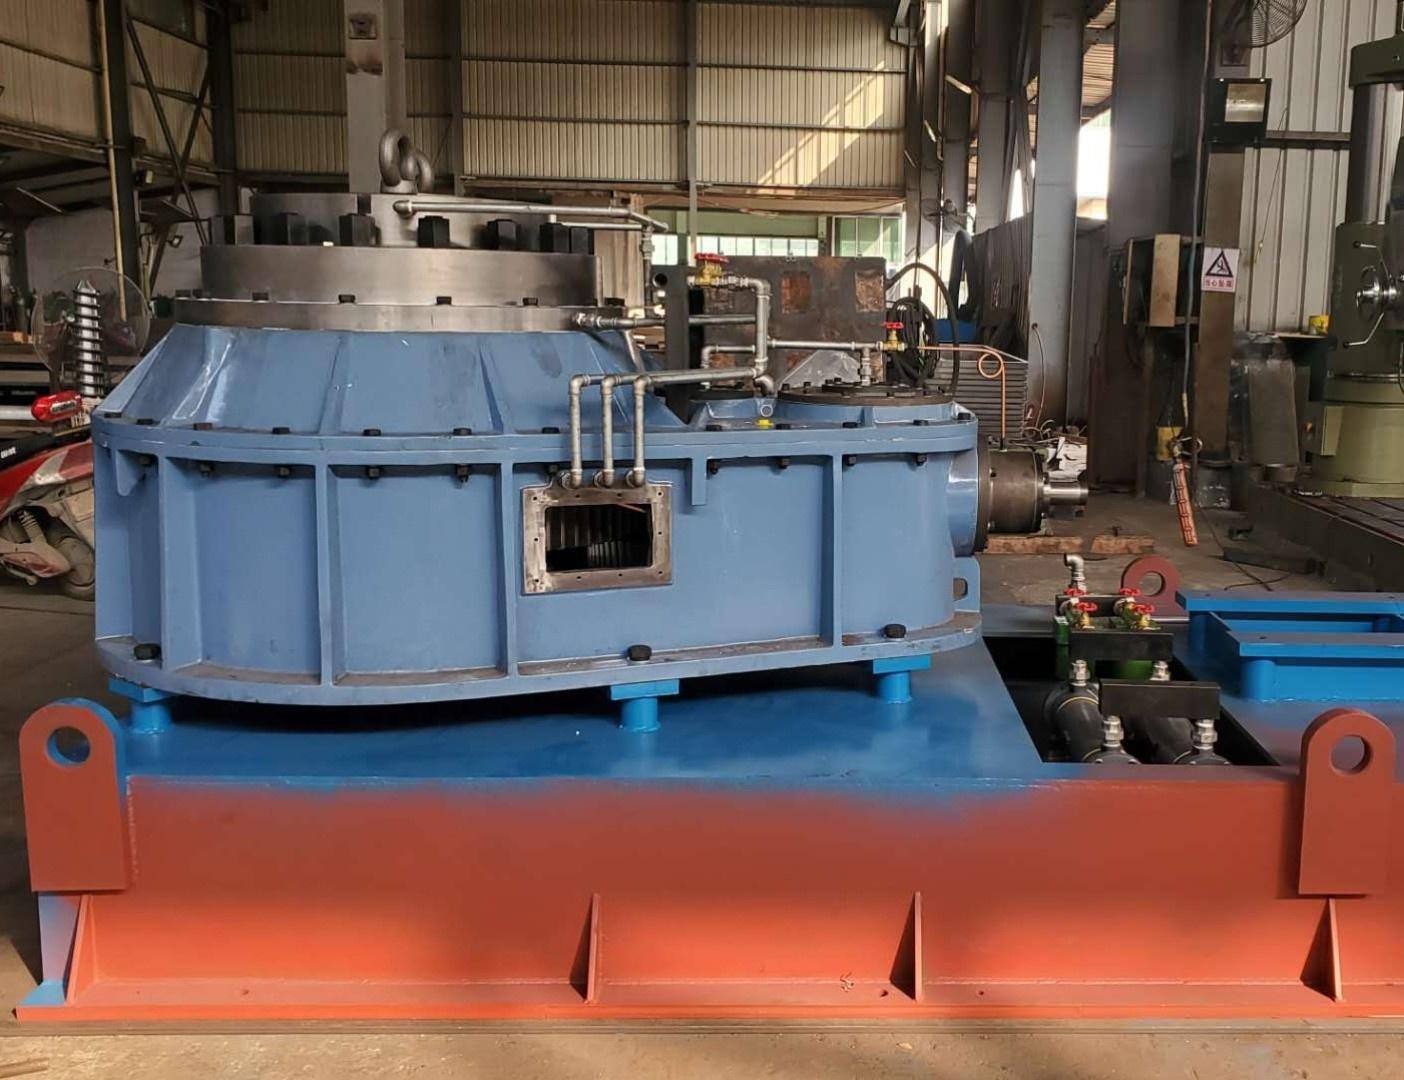 Hengtong's coated lead extrusion machine enters dry run test